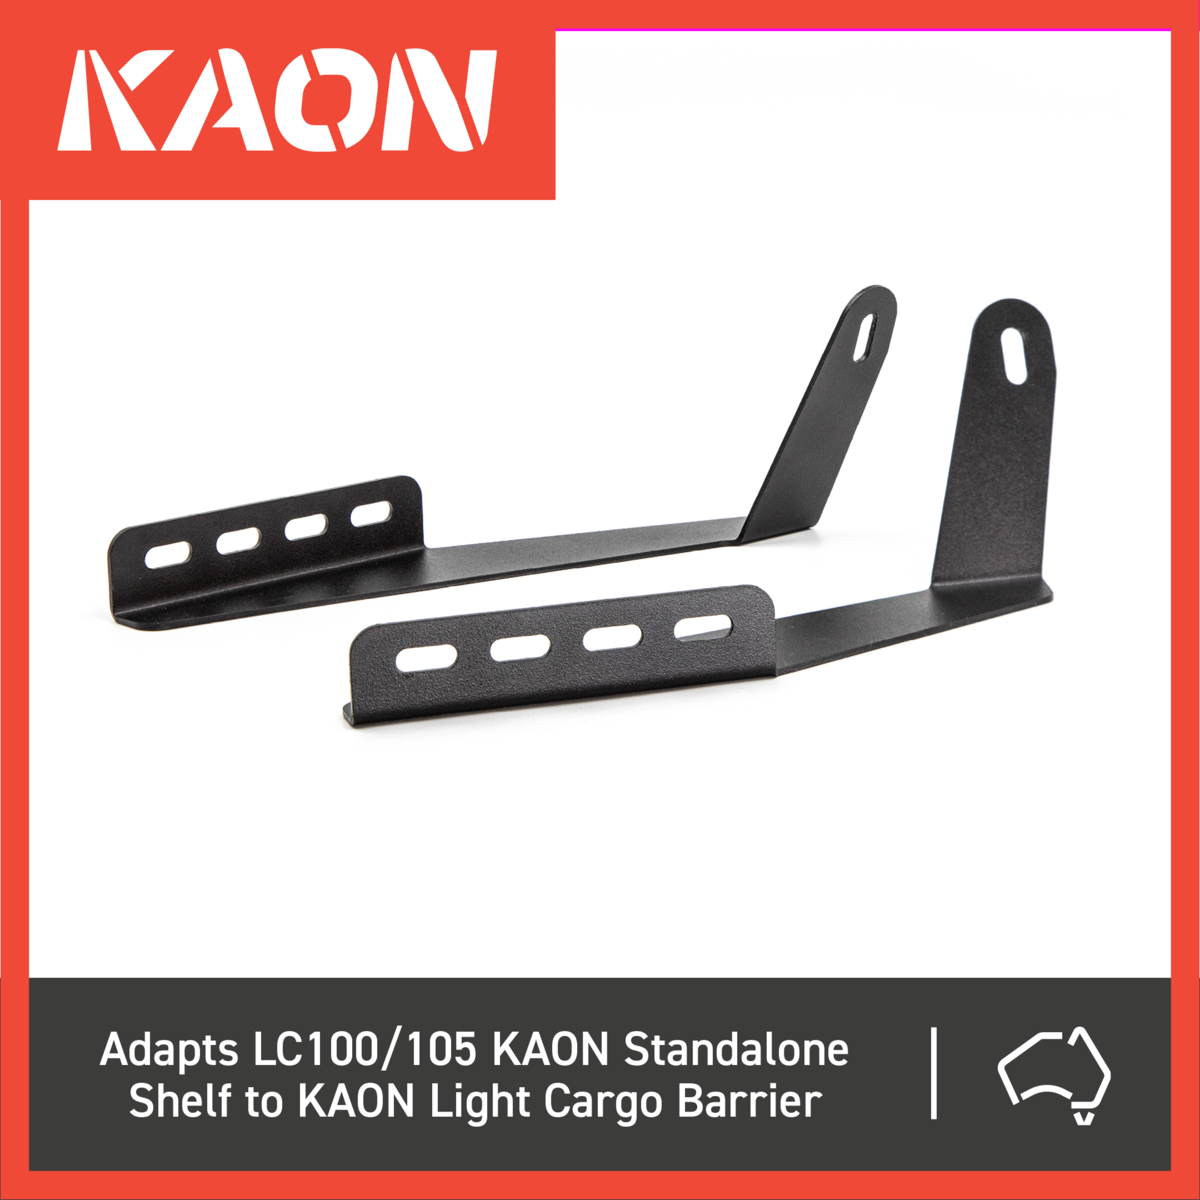 Standalone Shelf to Cargo Barrier Adaptor Bracket to suit Toyota LandCruiser LC100 / LC105